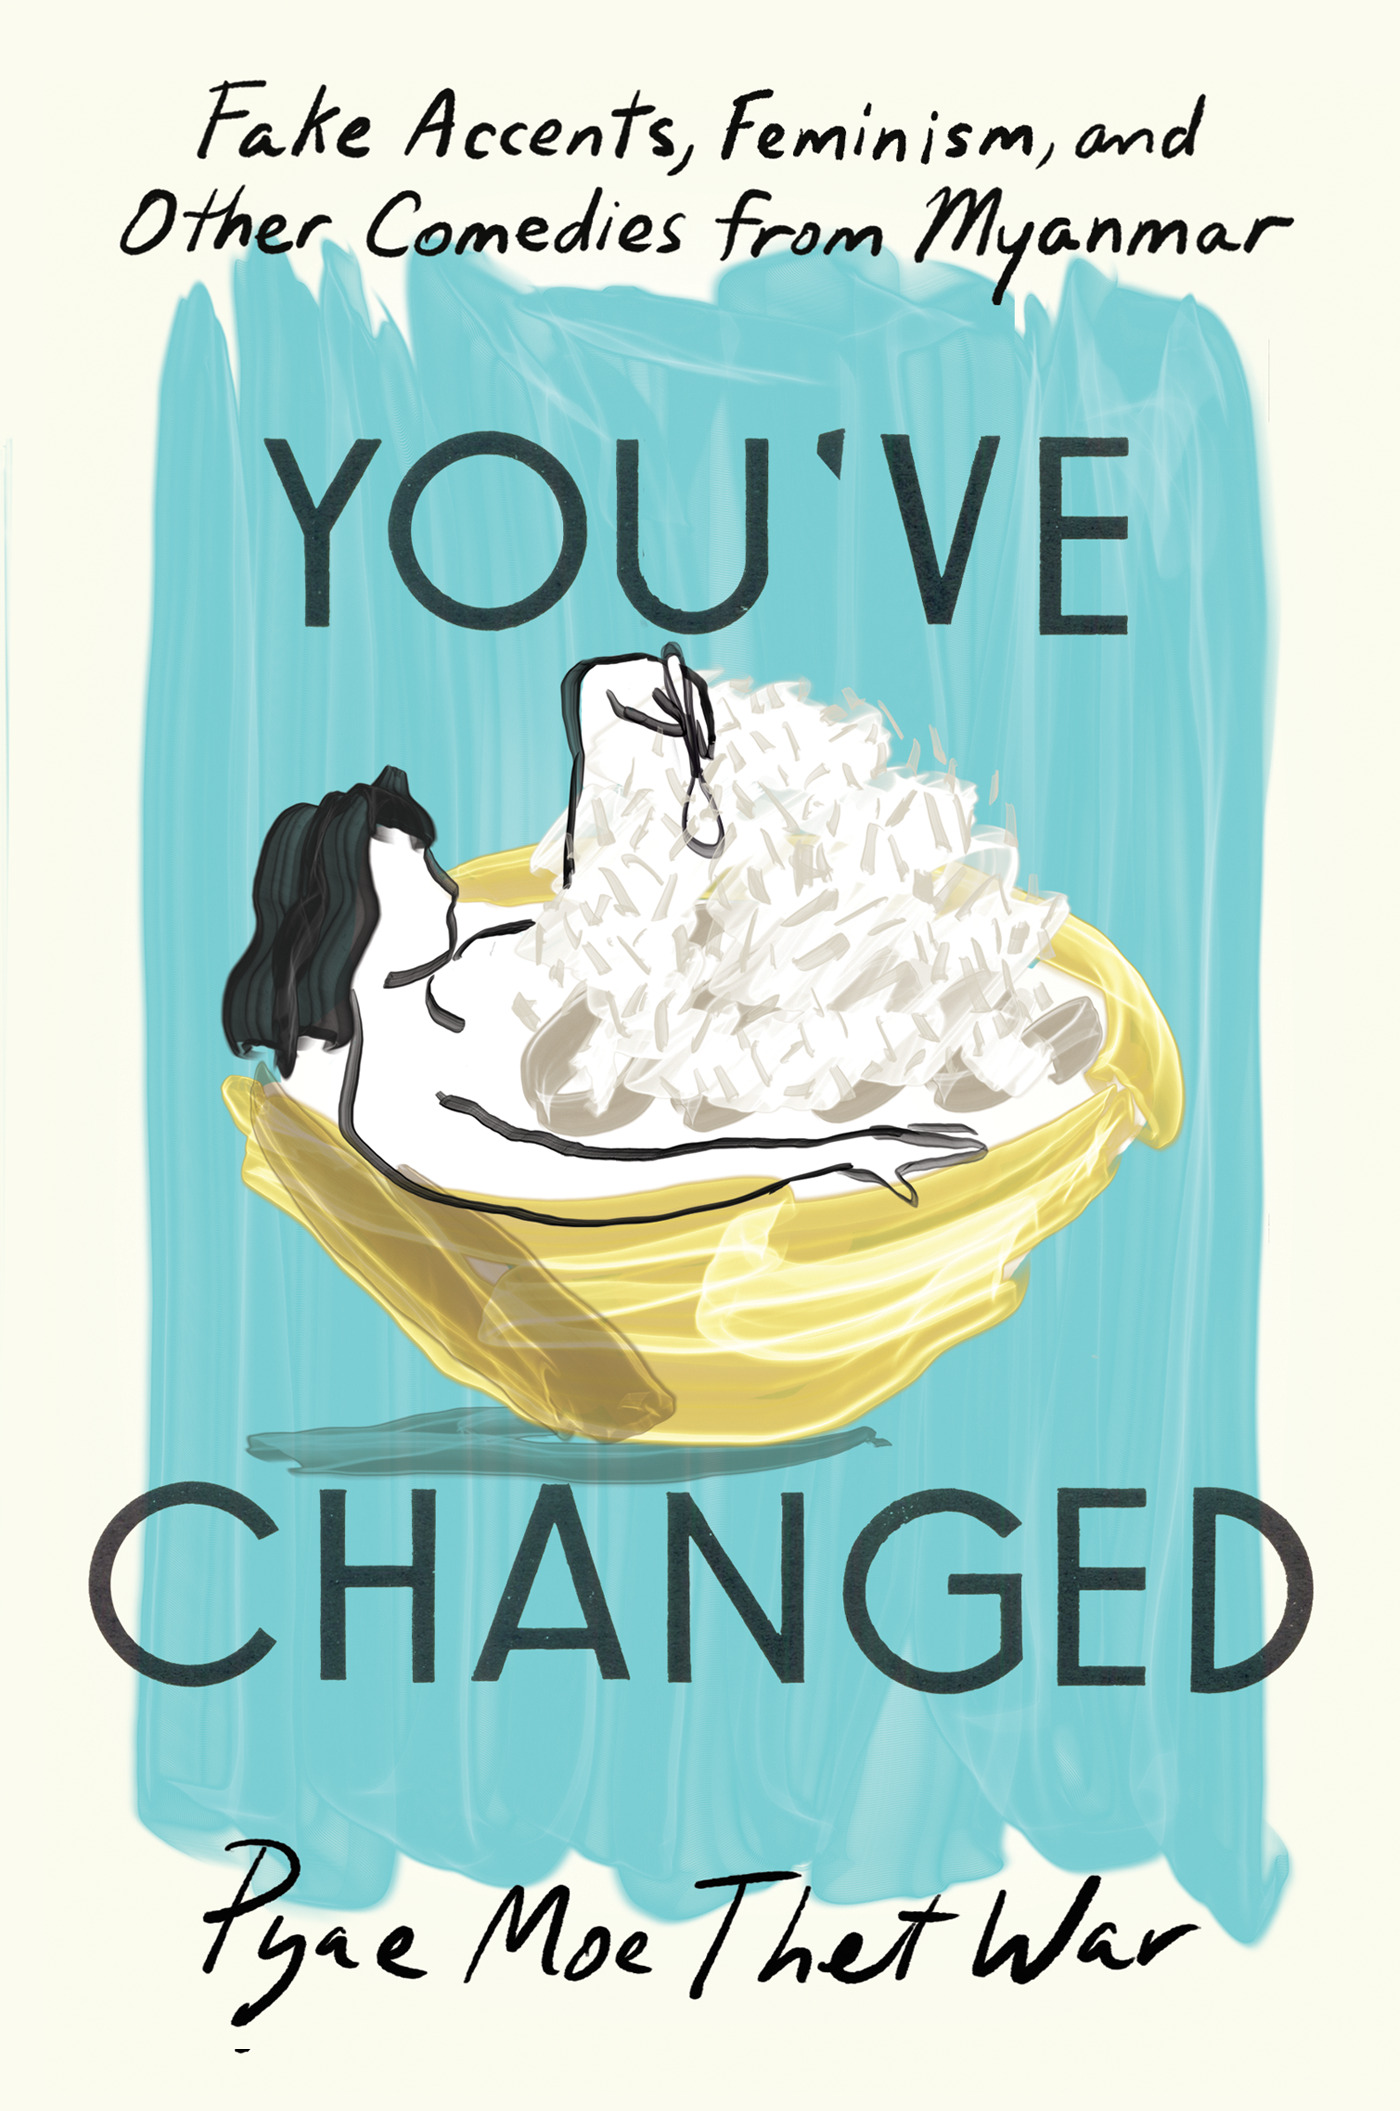 You've Changed : Fake Accents, Feminism, and Other Comedies from Myanmar | Biography & Memoir